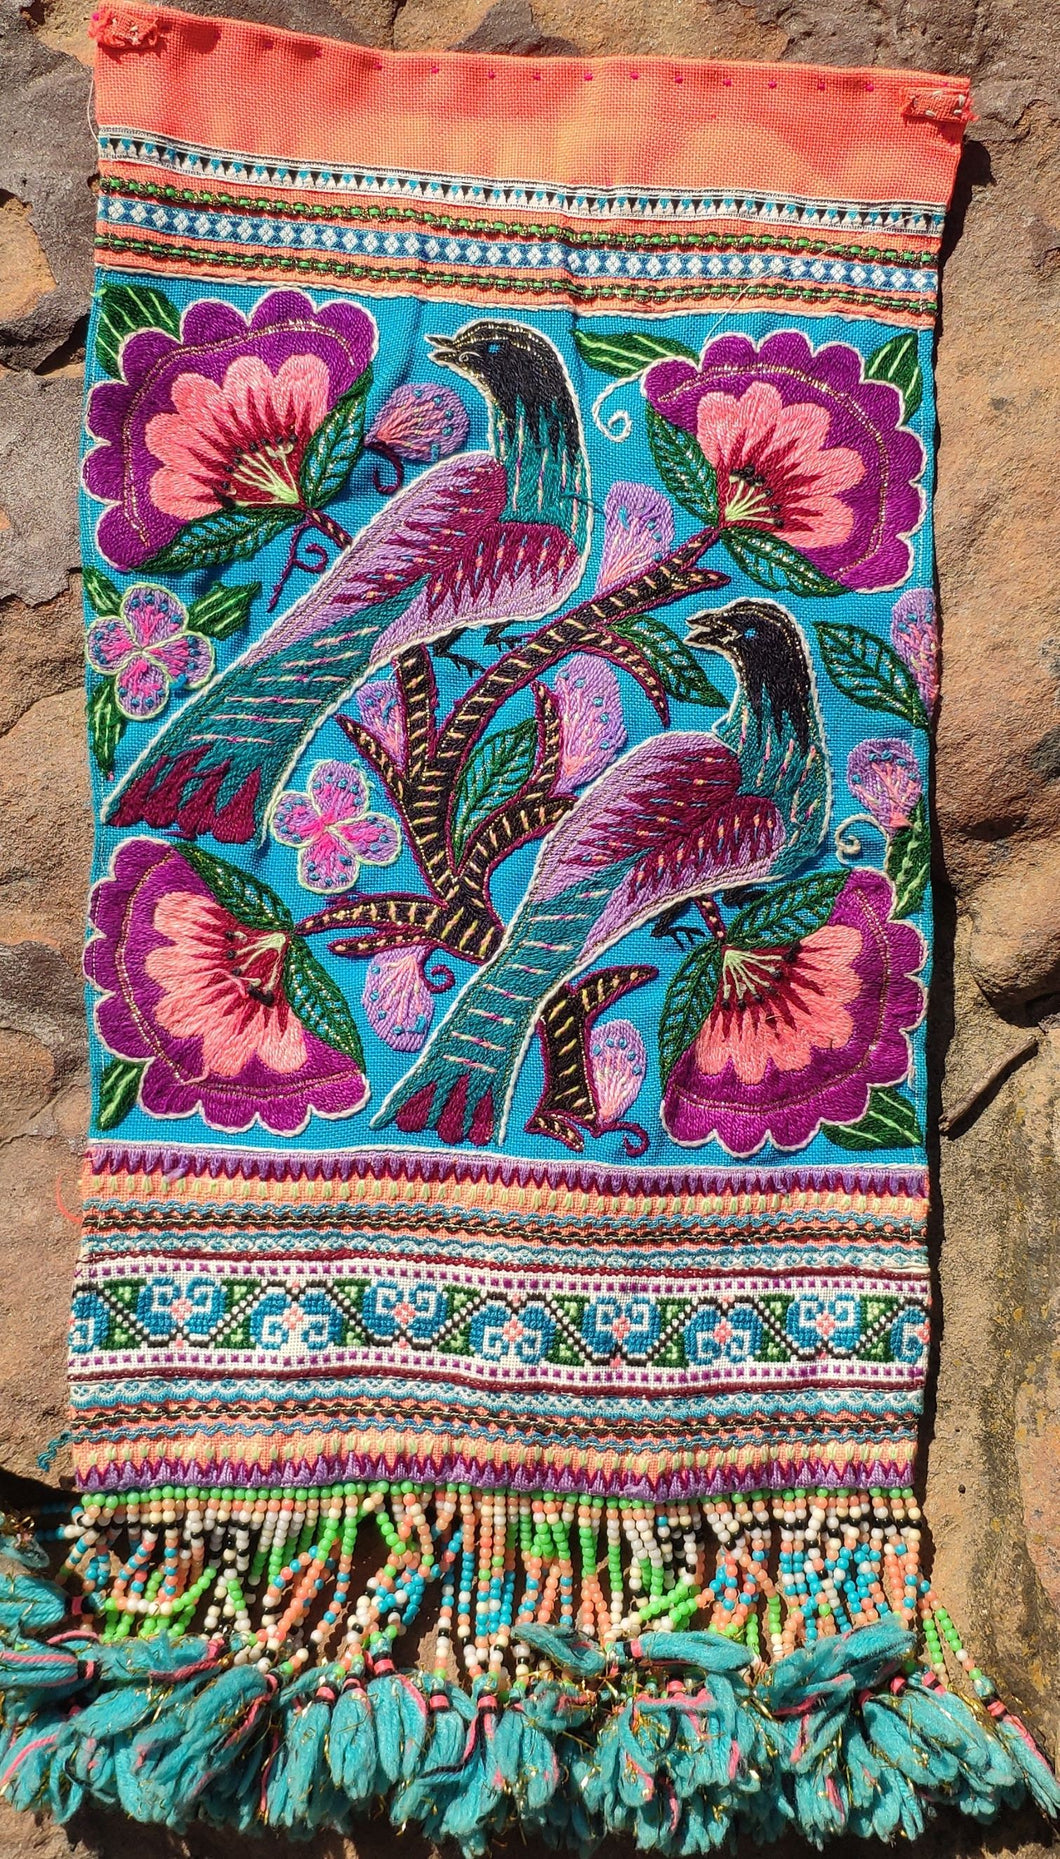 Hmong embroidered panels #4